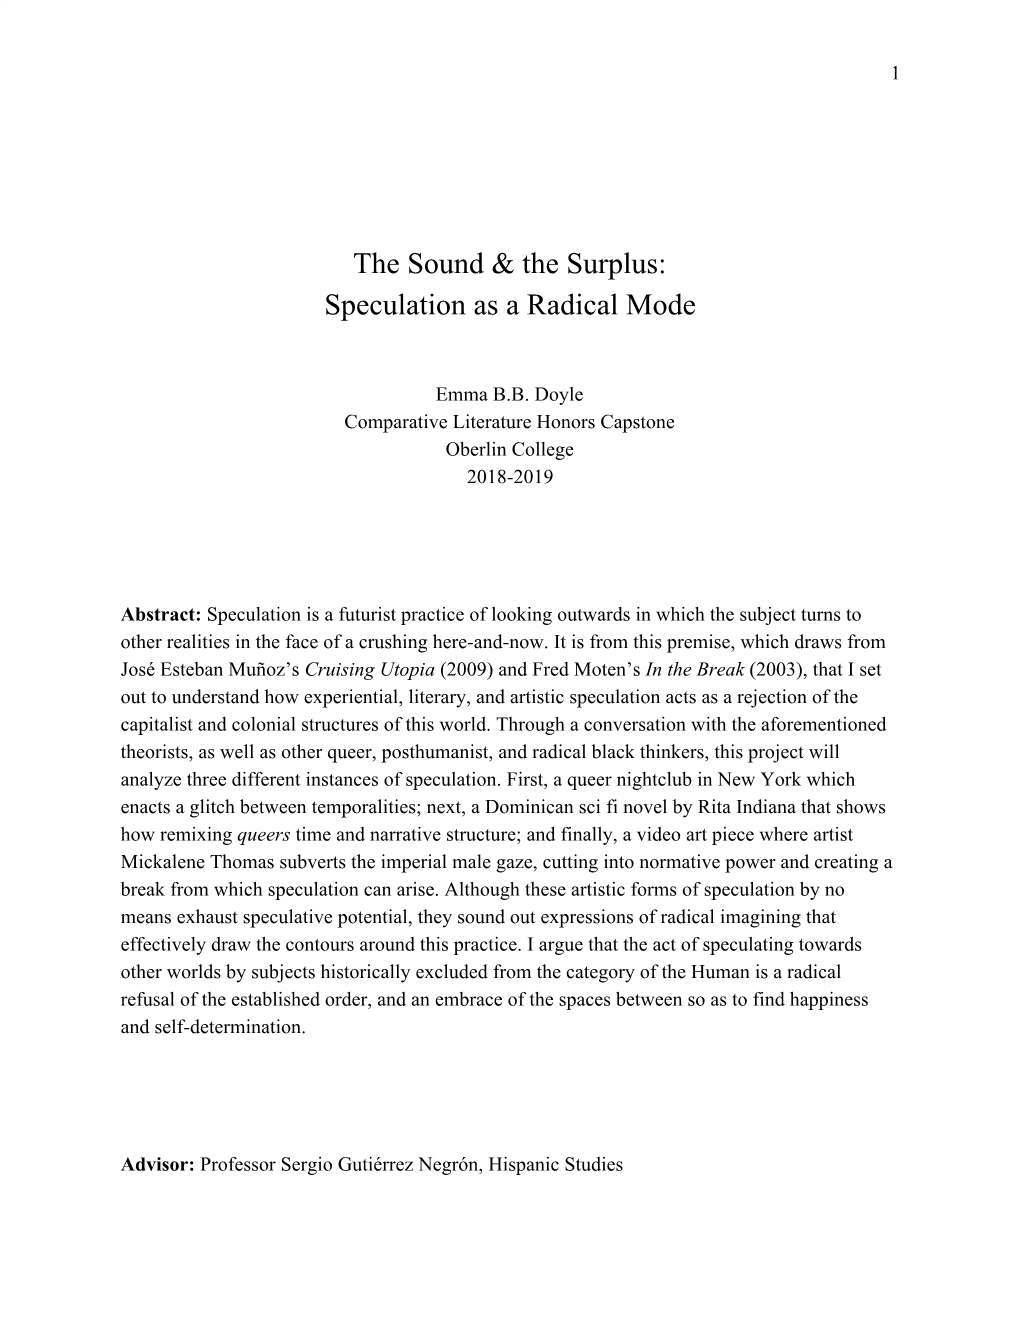 The Sound & the Surplus: Speculation As a Radical Mode